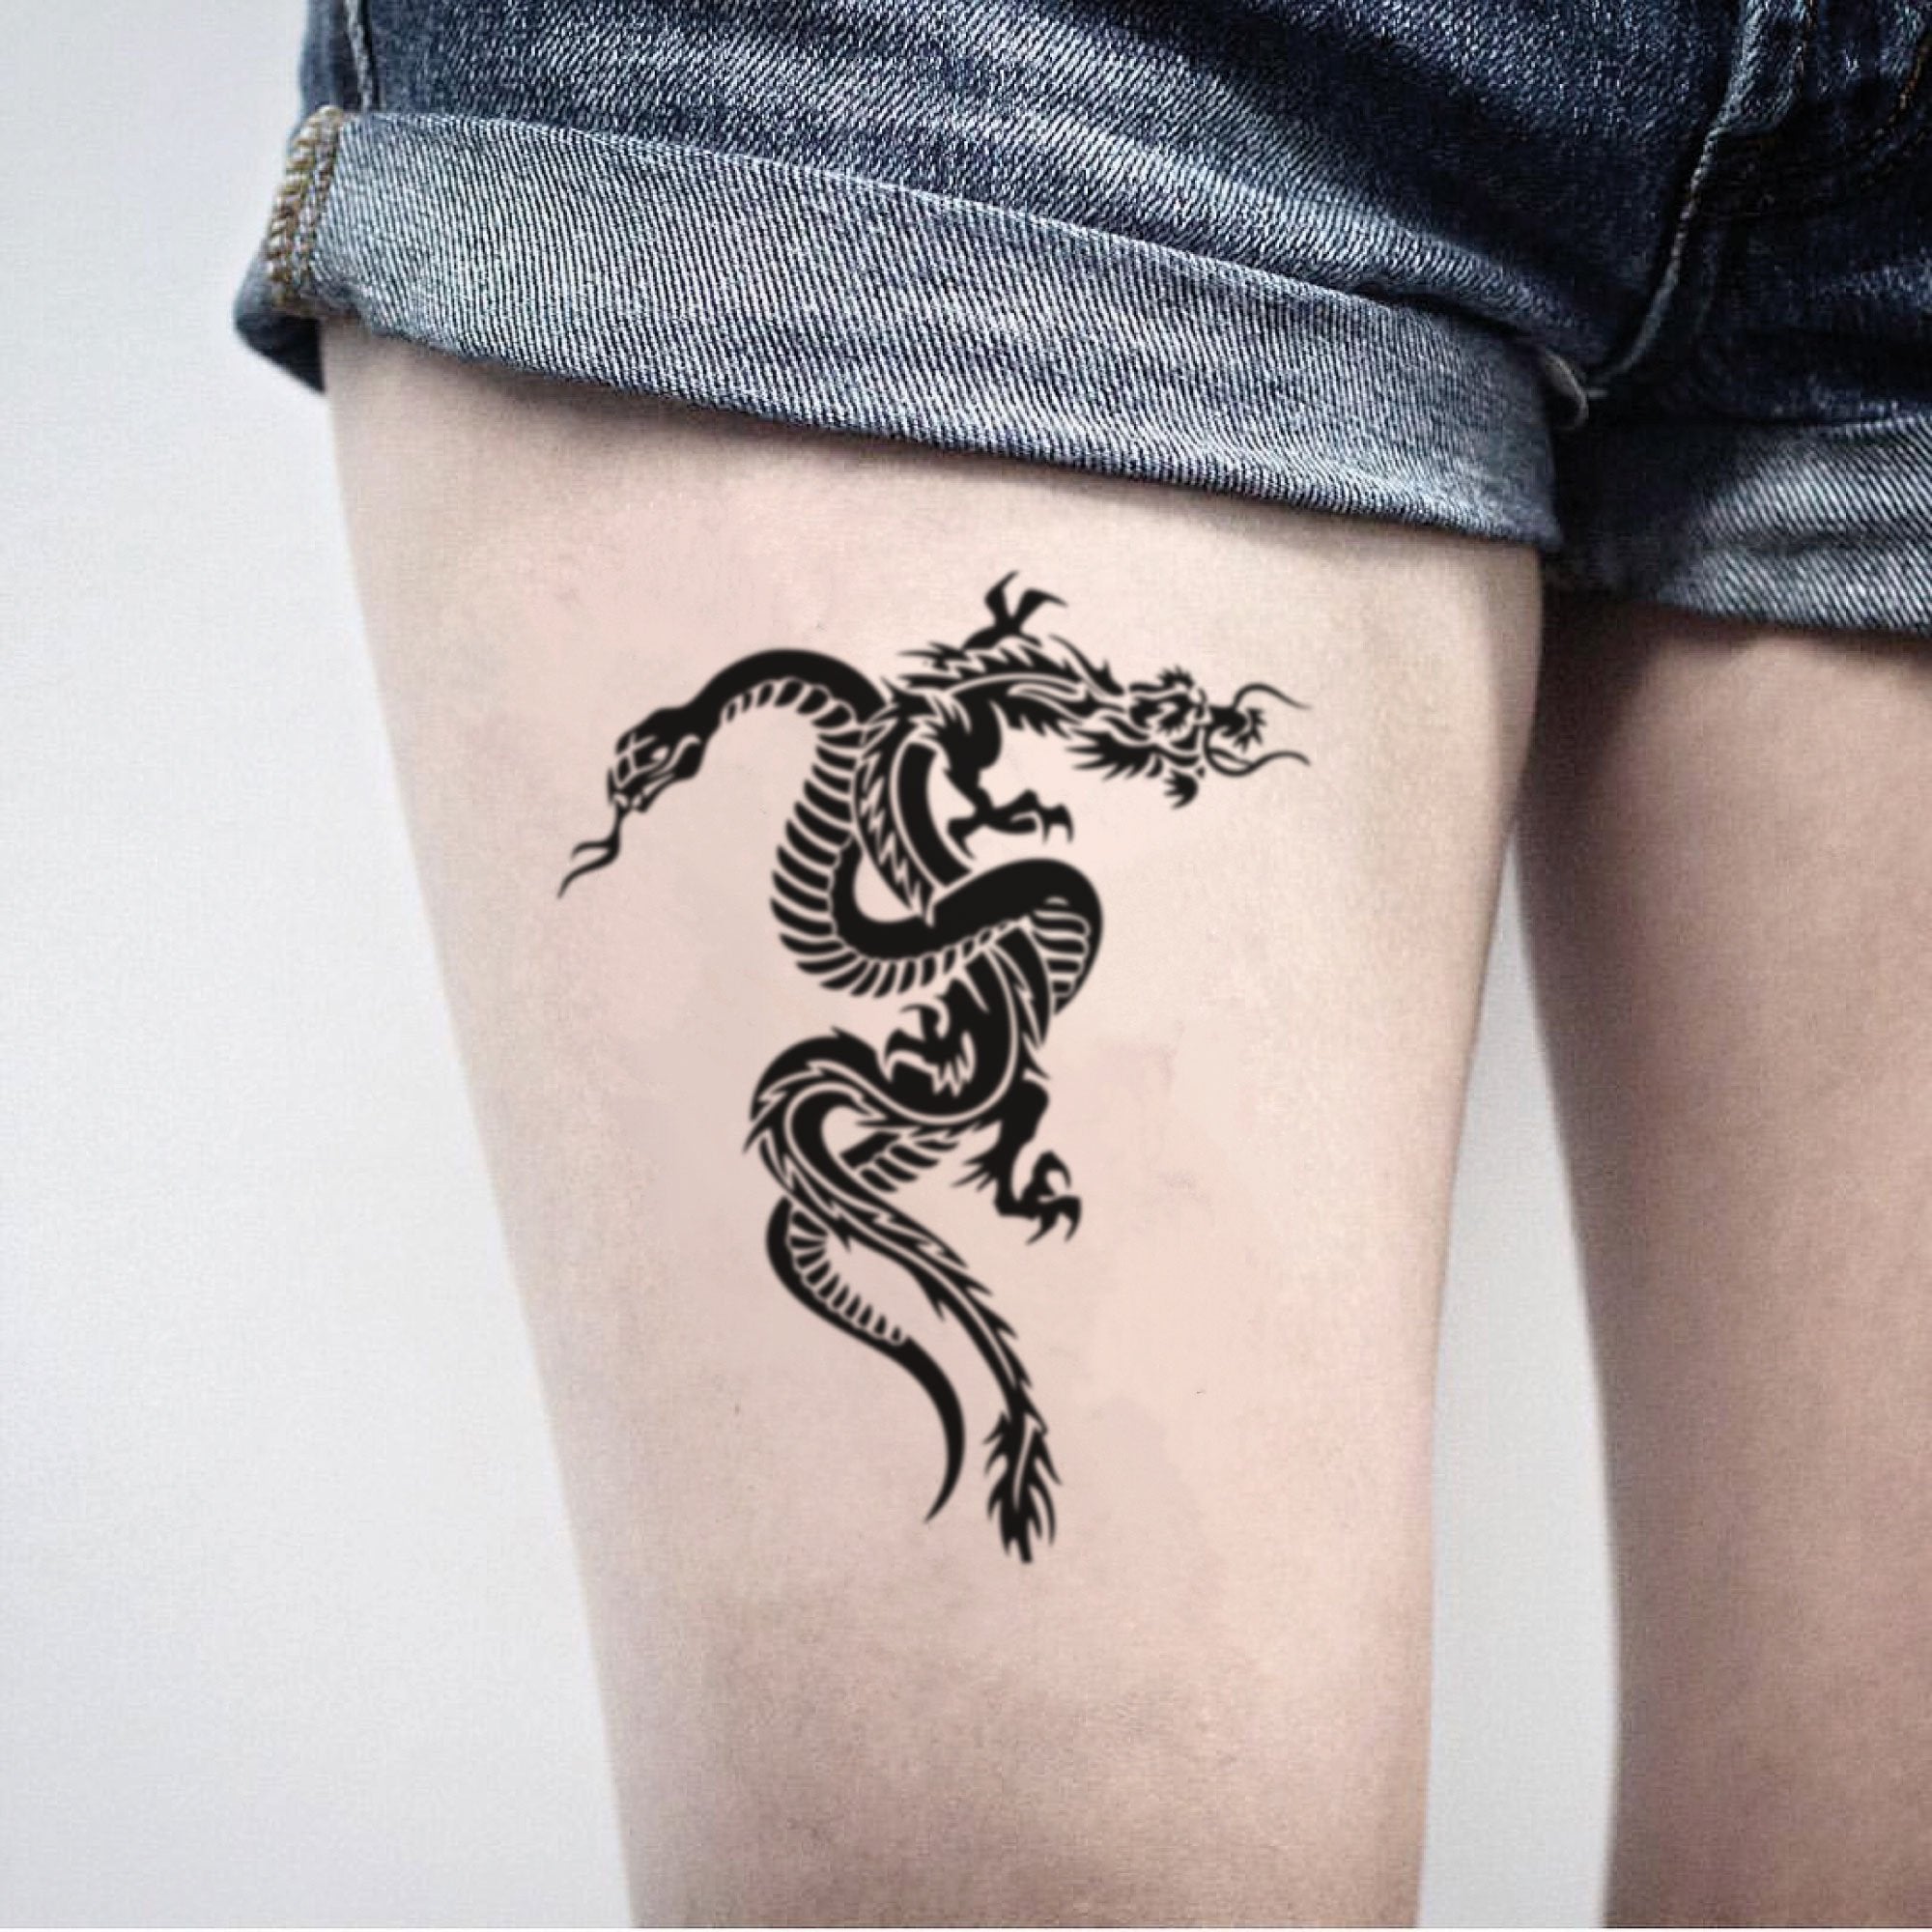 How to draw a Easy Dragon Tattoo By a Tattoo Artist - YouTube